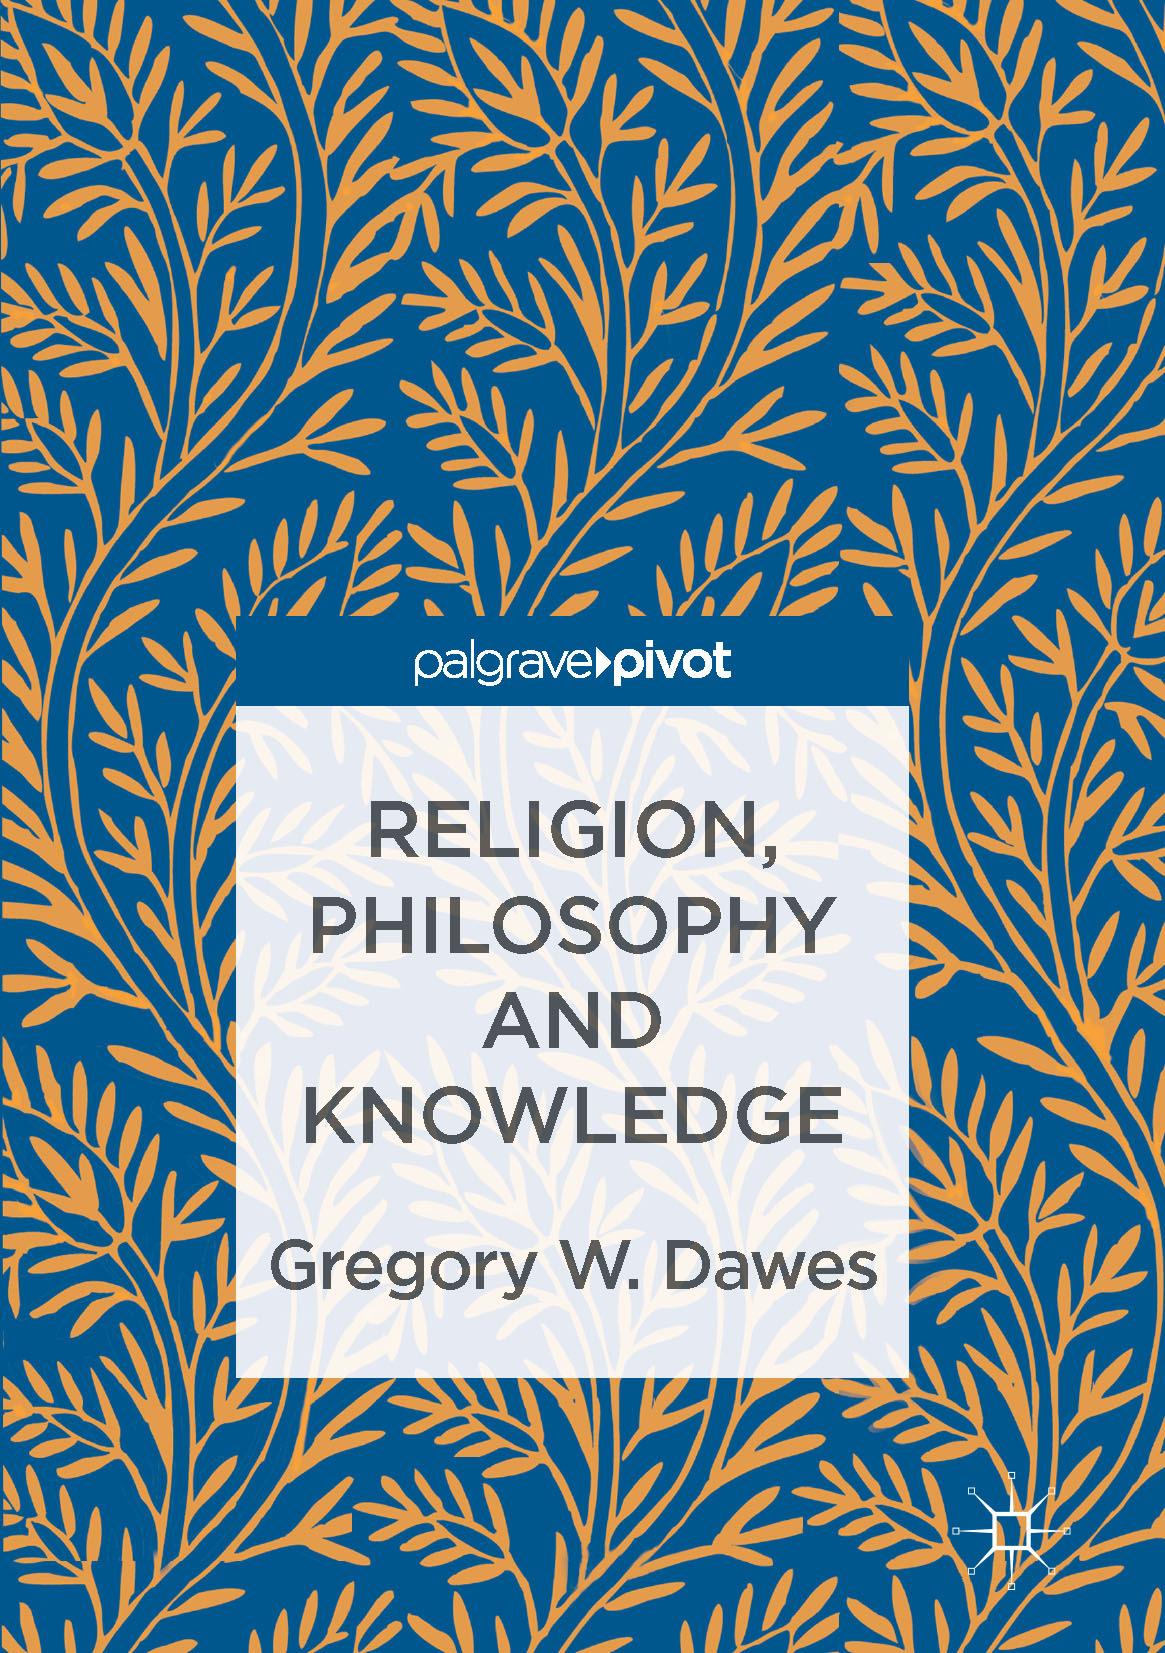 Dawes, Gregory W. - Religion, Philosophy and Knowledge, ebook